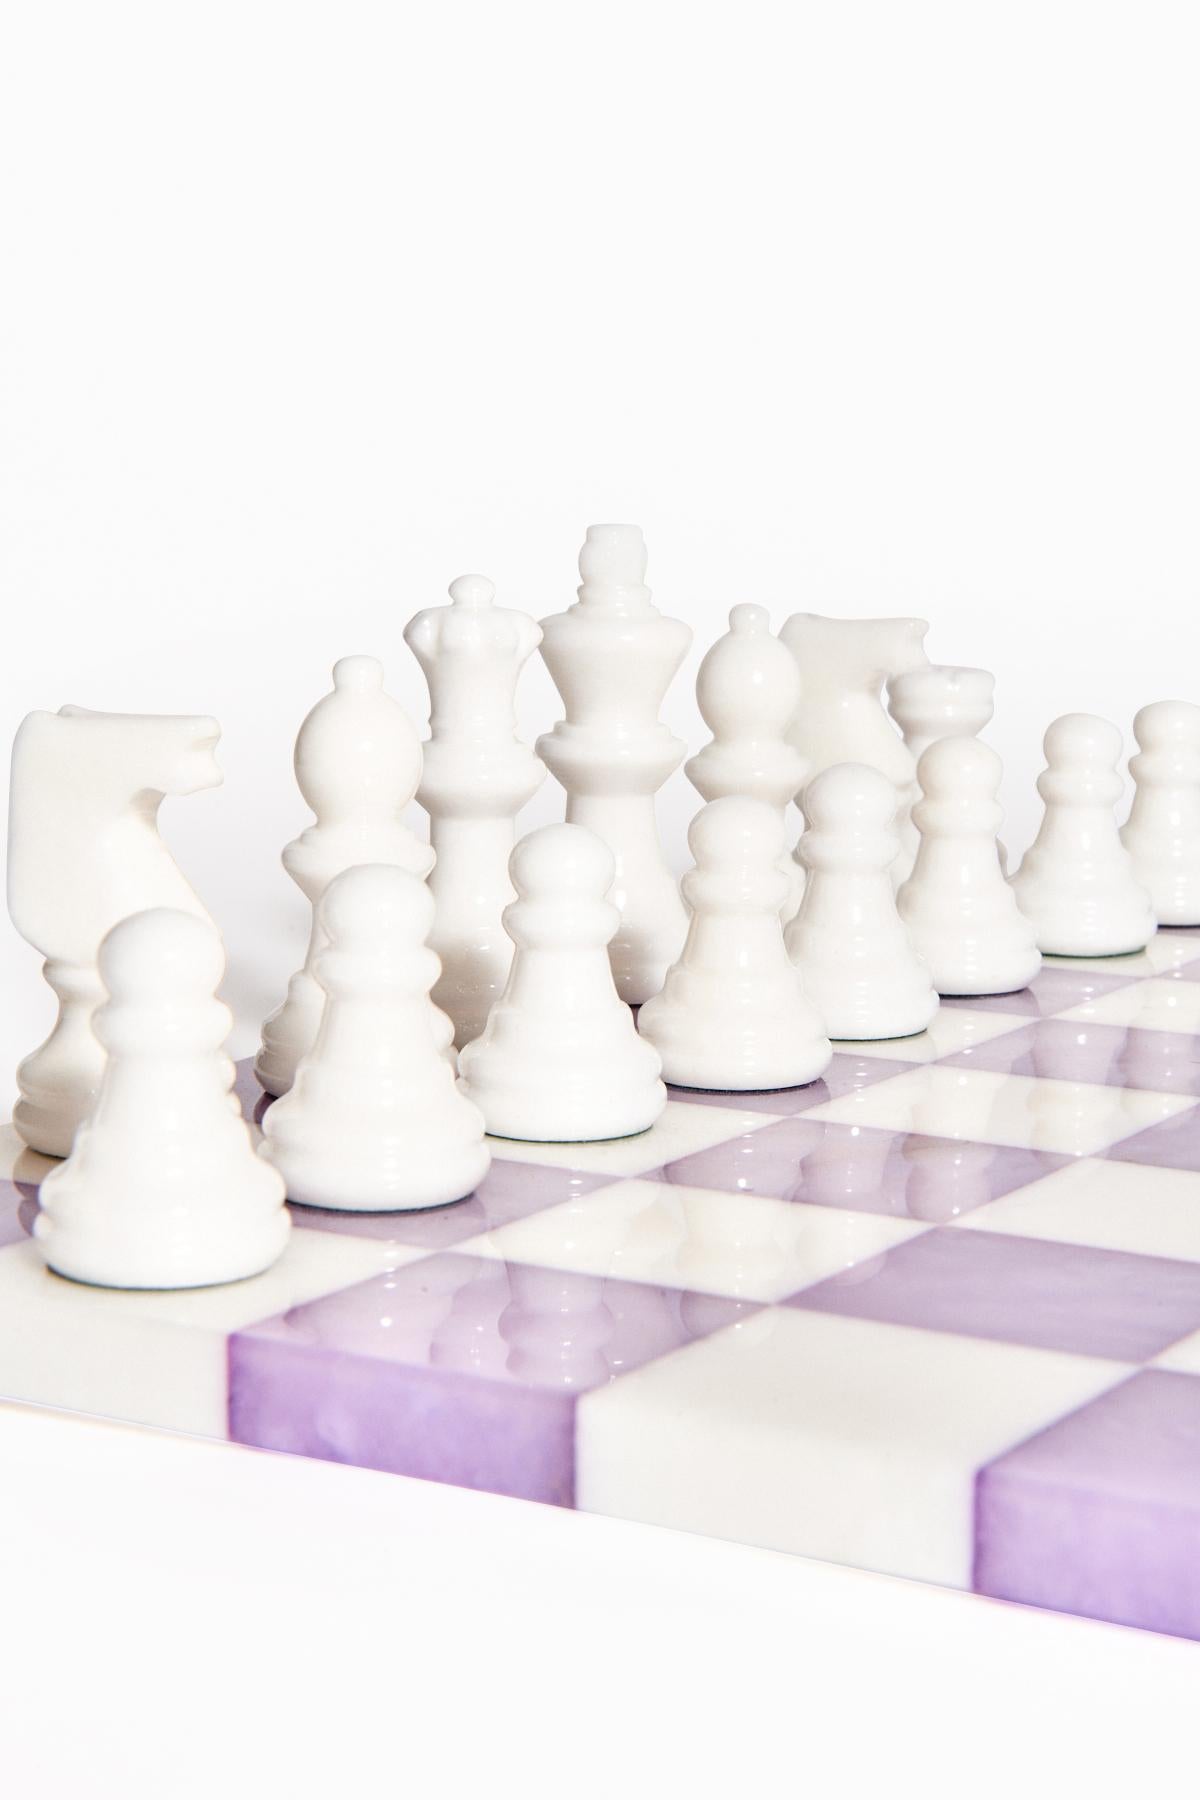 Contemporary Italian Amethyst/White Large Alabaster Chess Set For Sale